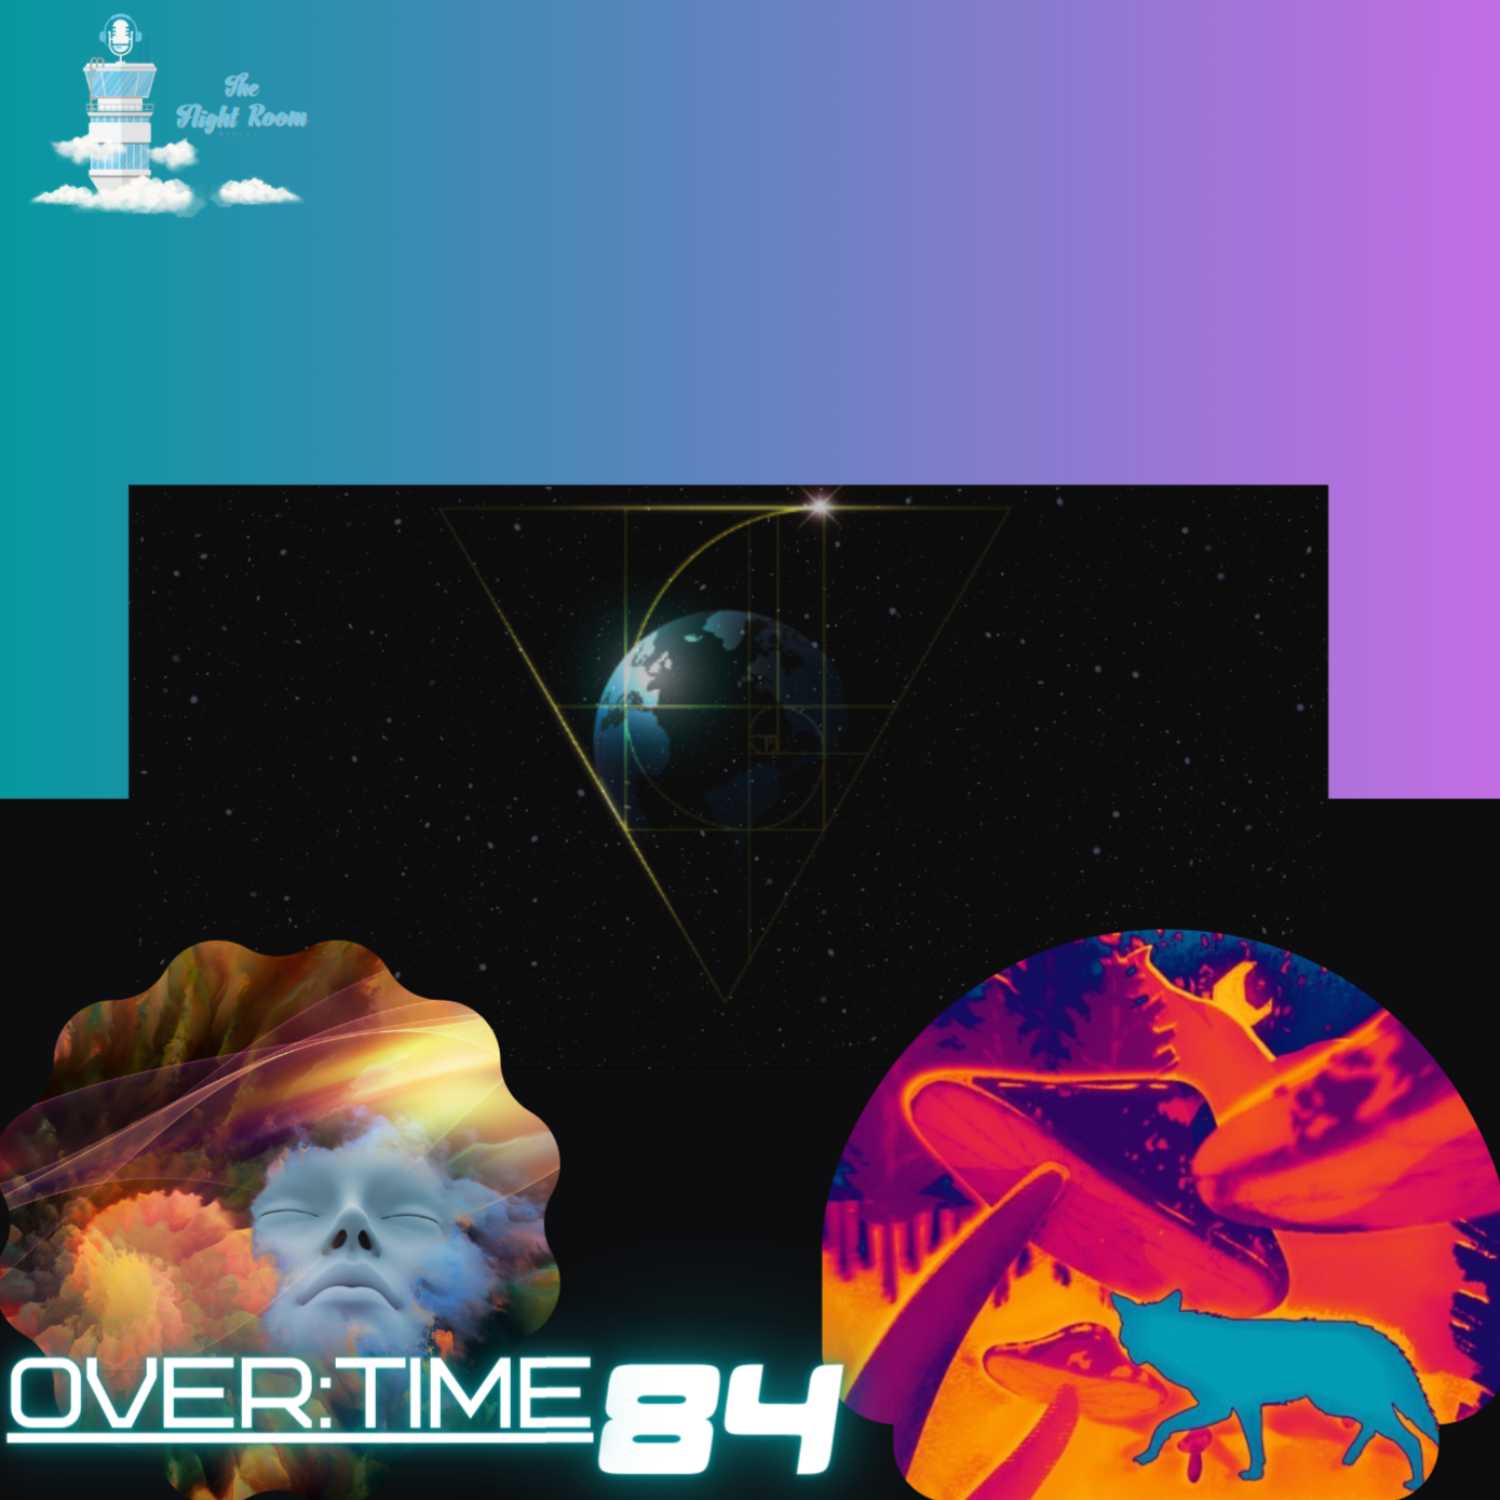 OVER:TIME WITH THE FLIGHT ROOM #84 ( EARTH AS A REALM FEAT THE BLUE COYOTE )